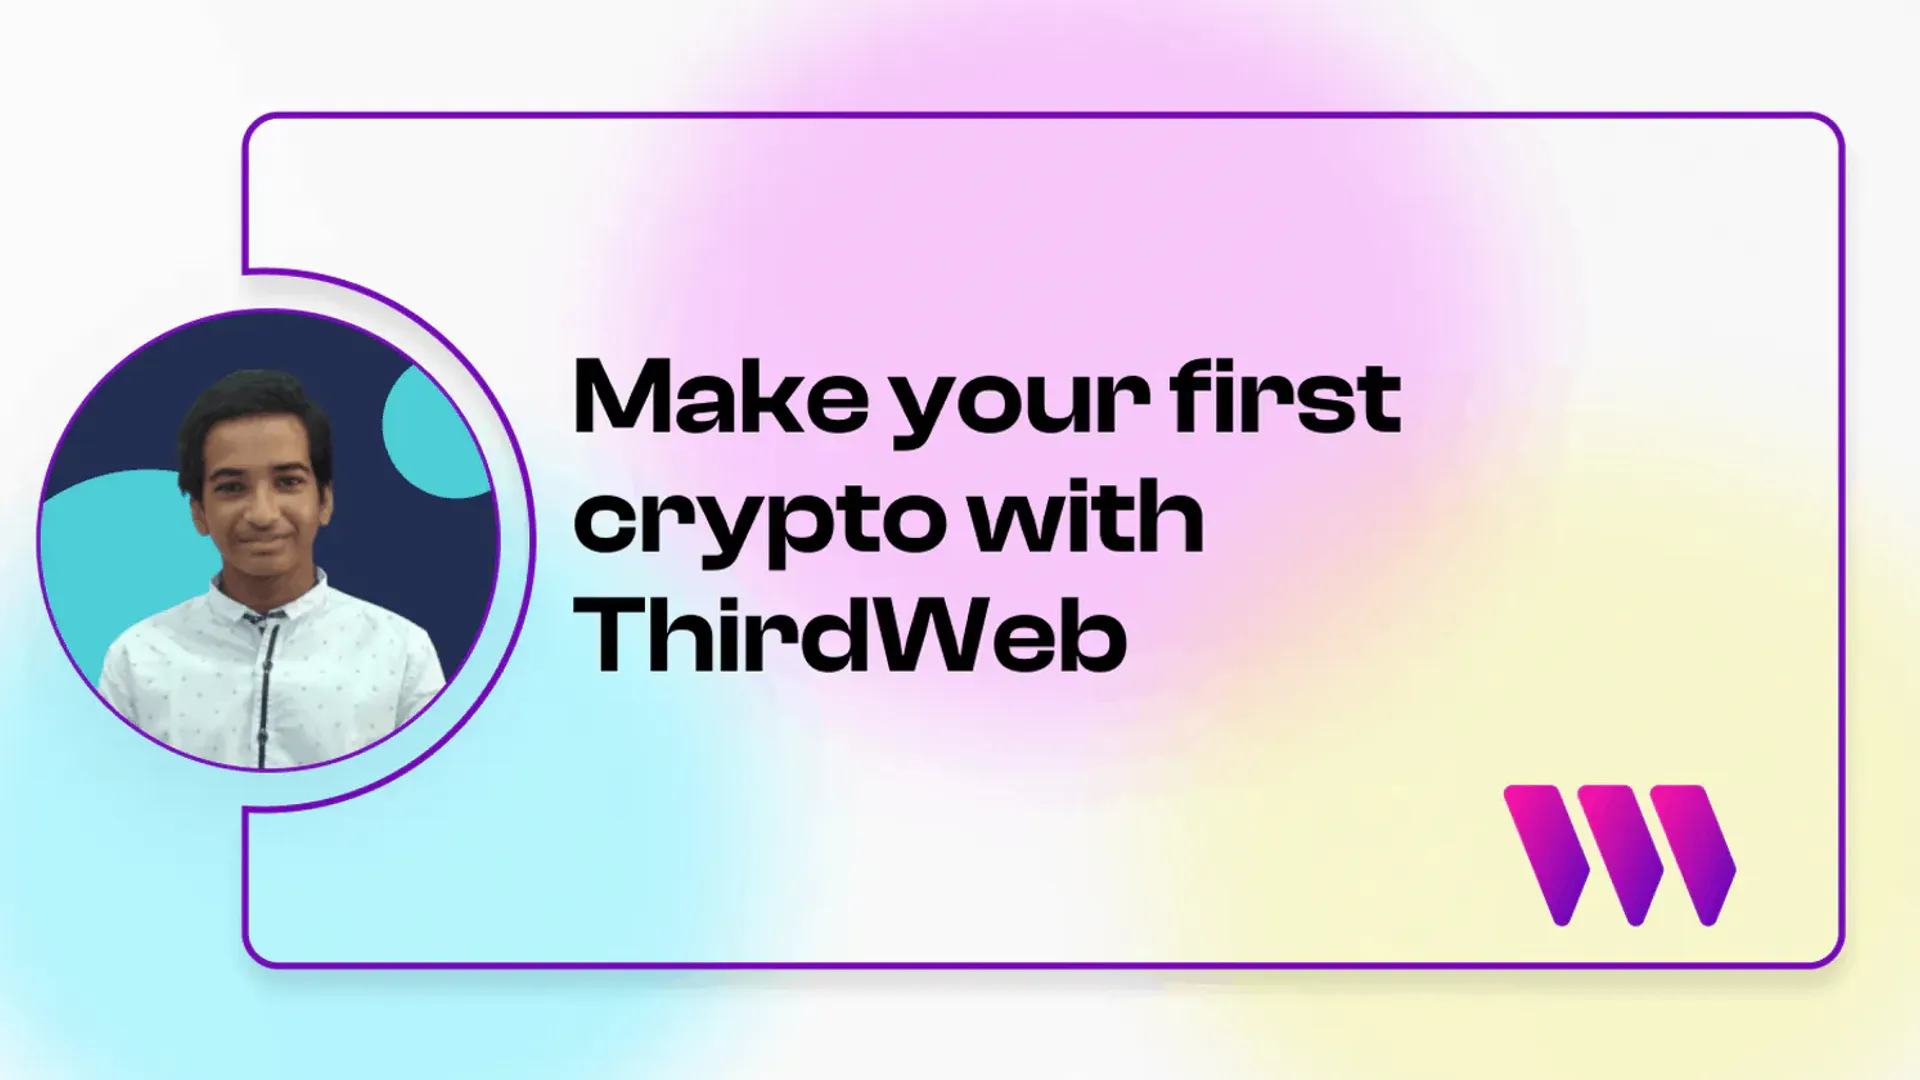 Make your first Crypto with ThirdWeb 🤯